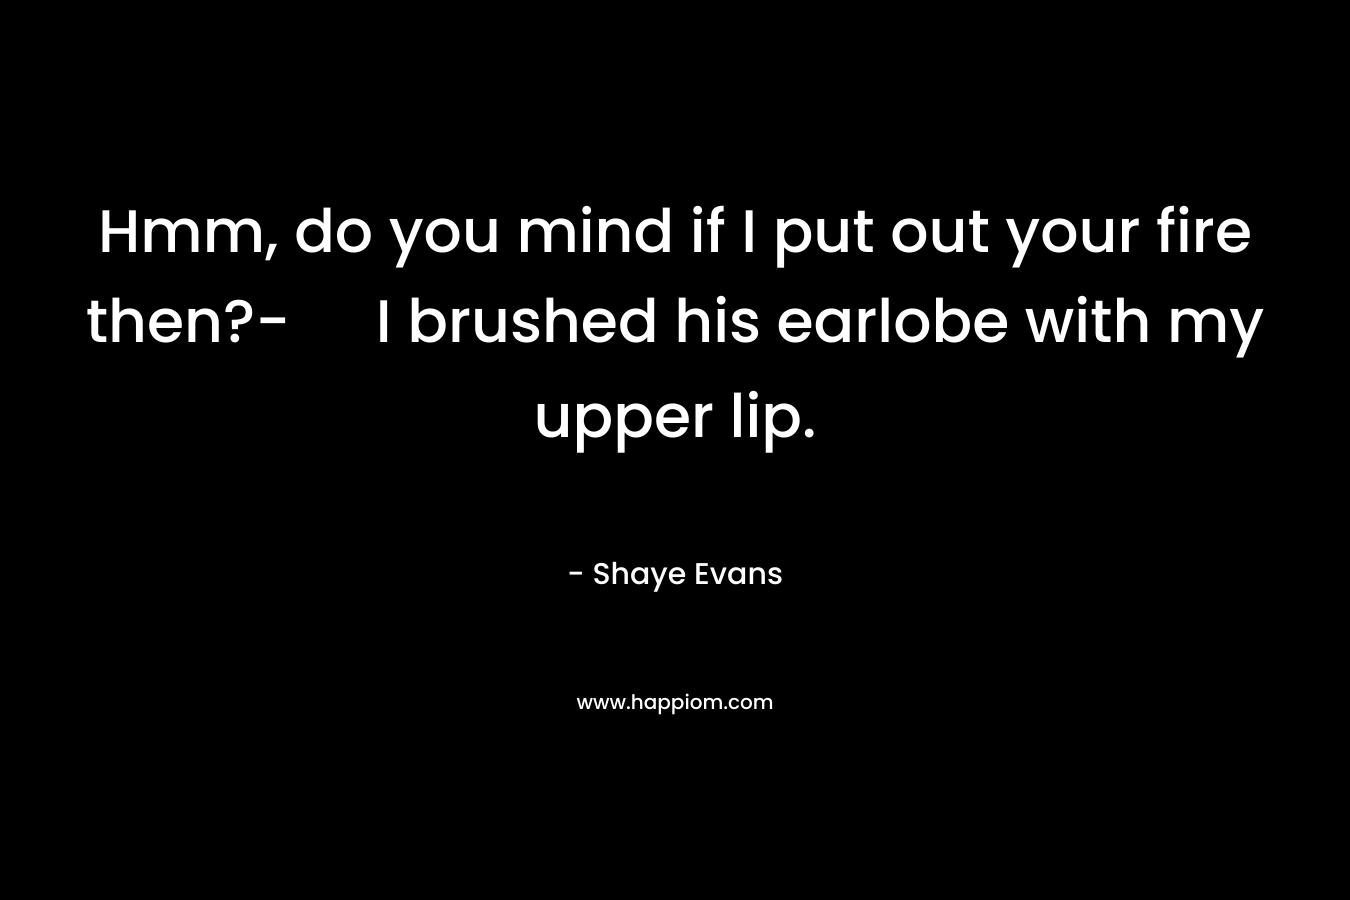 Hmm, do you mind if I put out your fire then?- I brushed his earlobe with my upper lip. – Shaye Evans